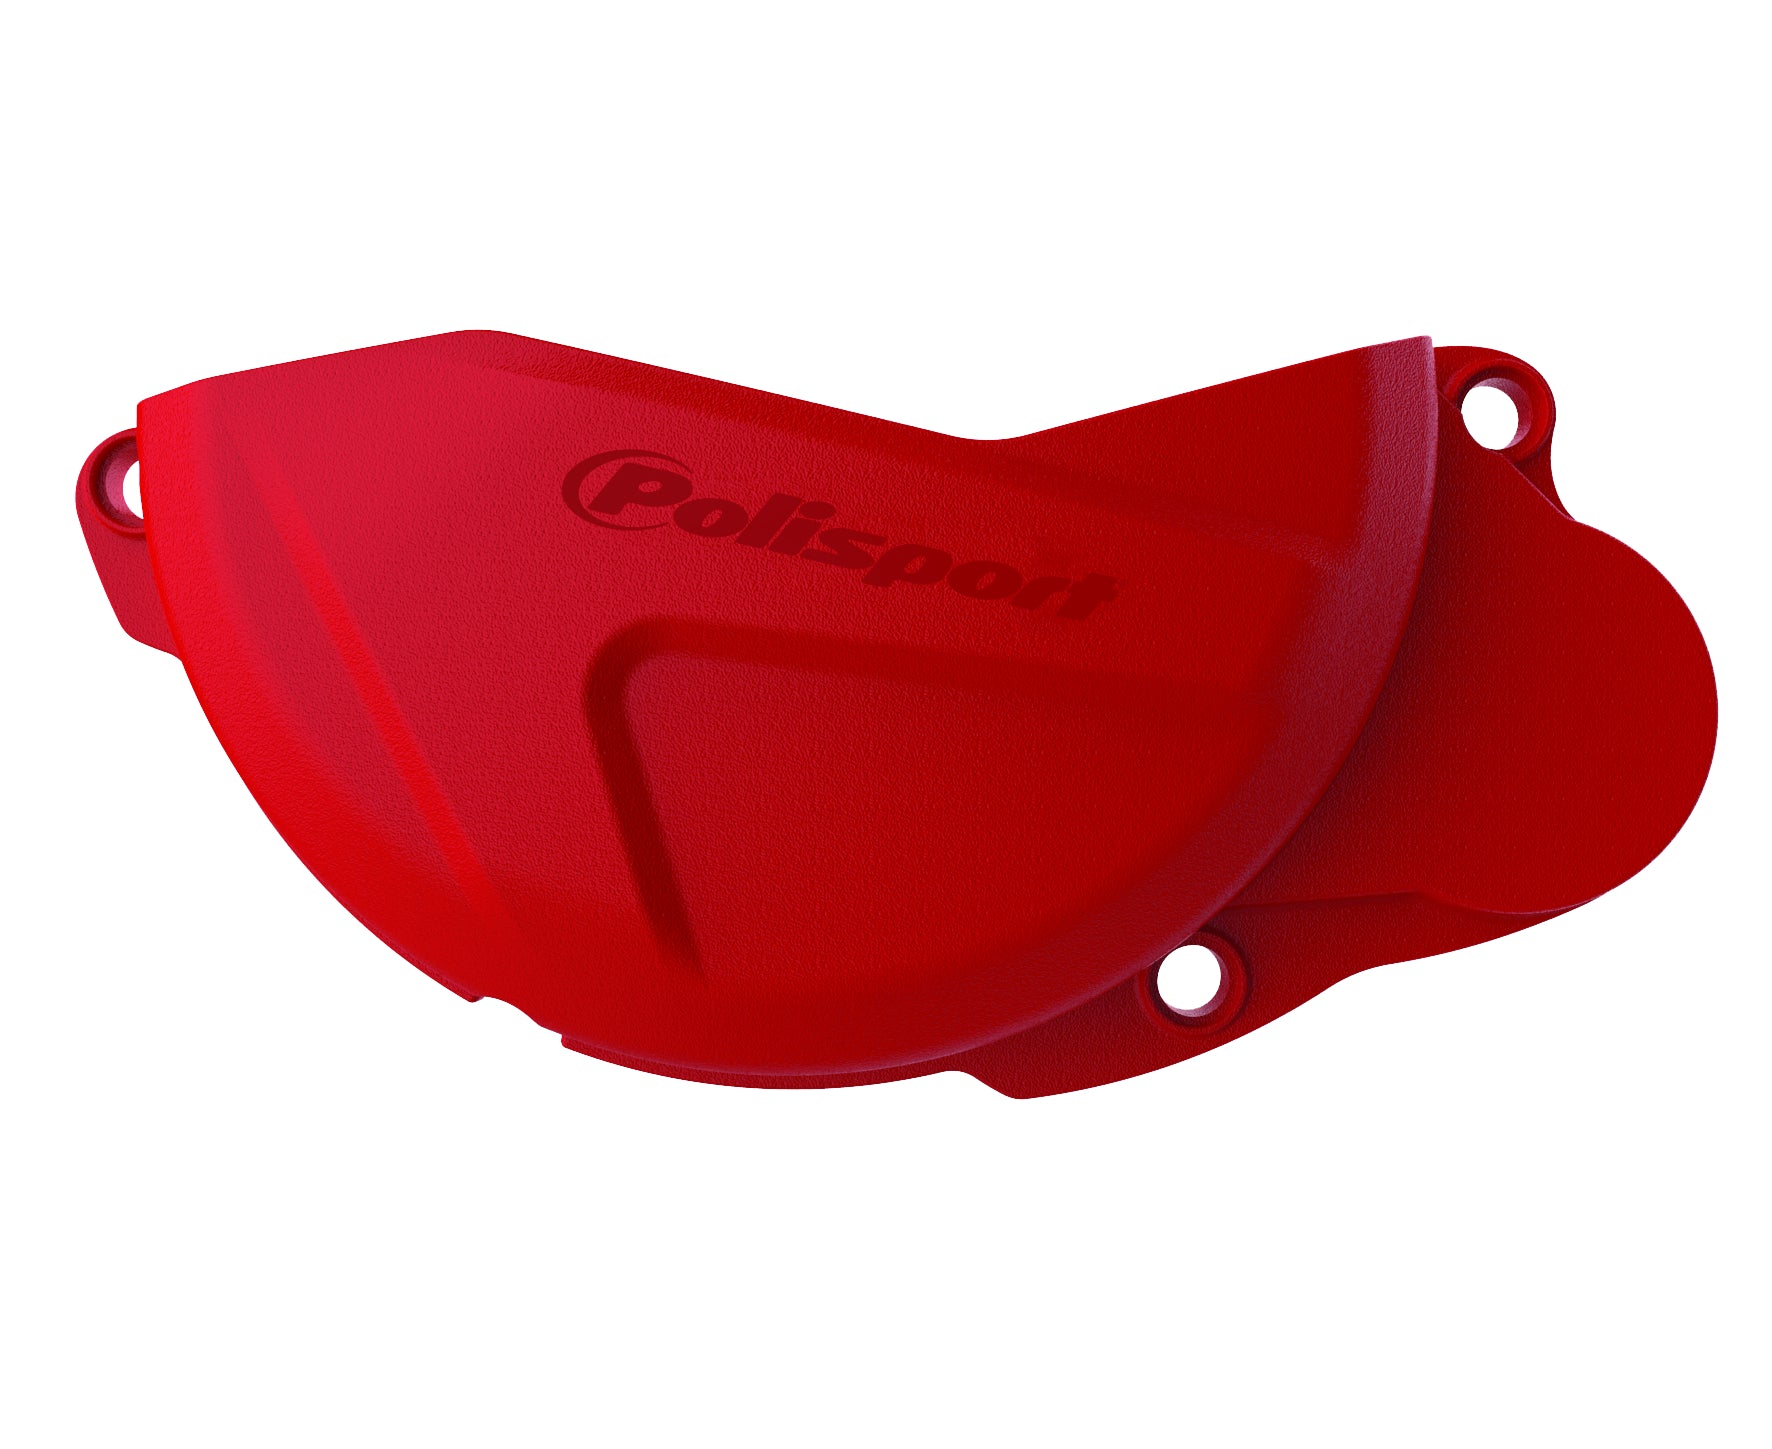 Polisport Clutch Cover Protector HONDA CRF250R 10;13-17 Red